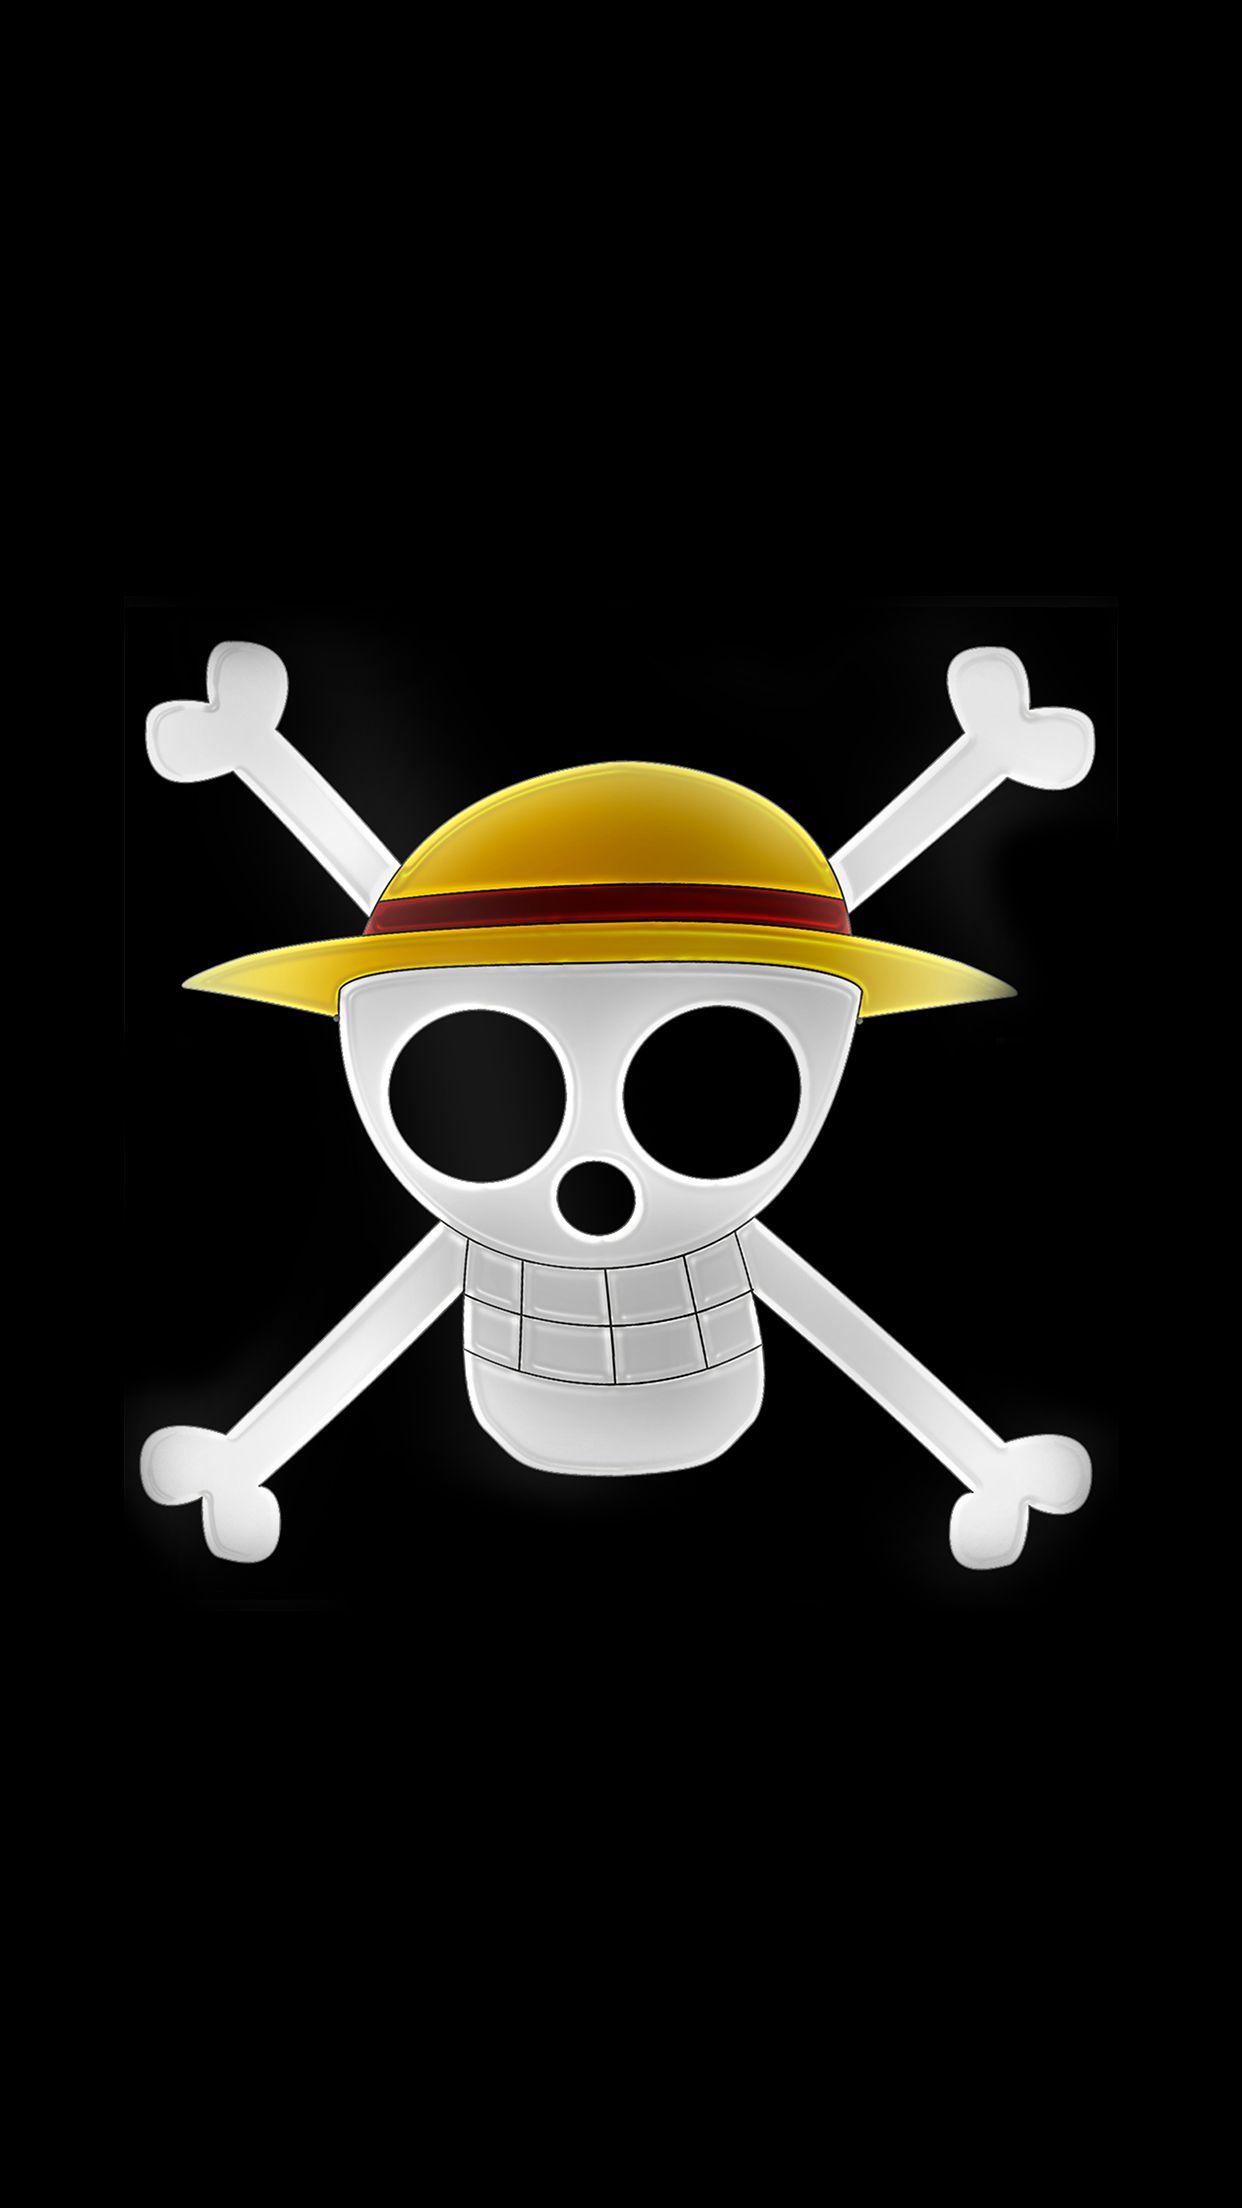 One Piece amoled wallpaper by BKevin95  Download on ZEDGE  11f1